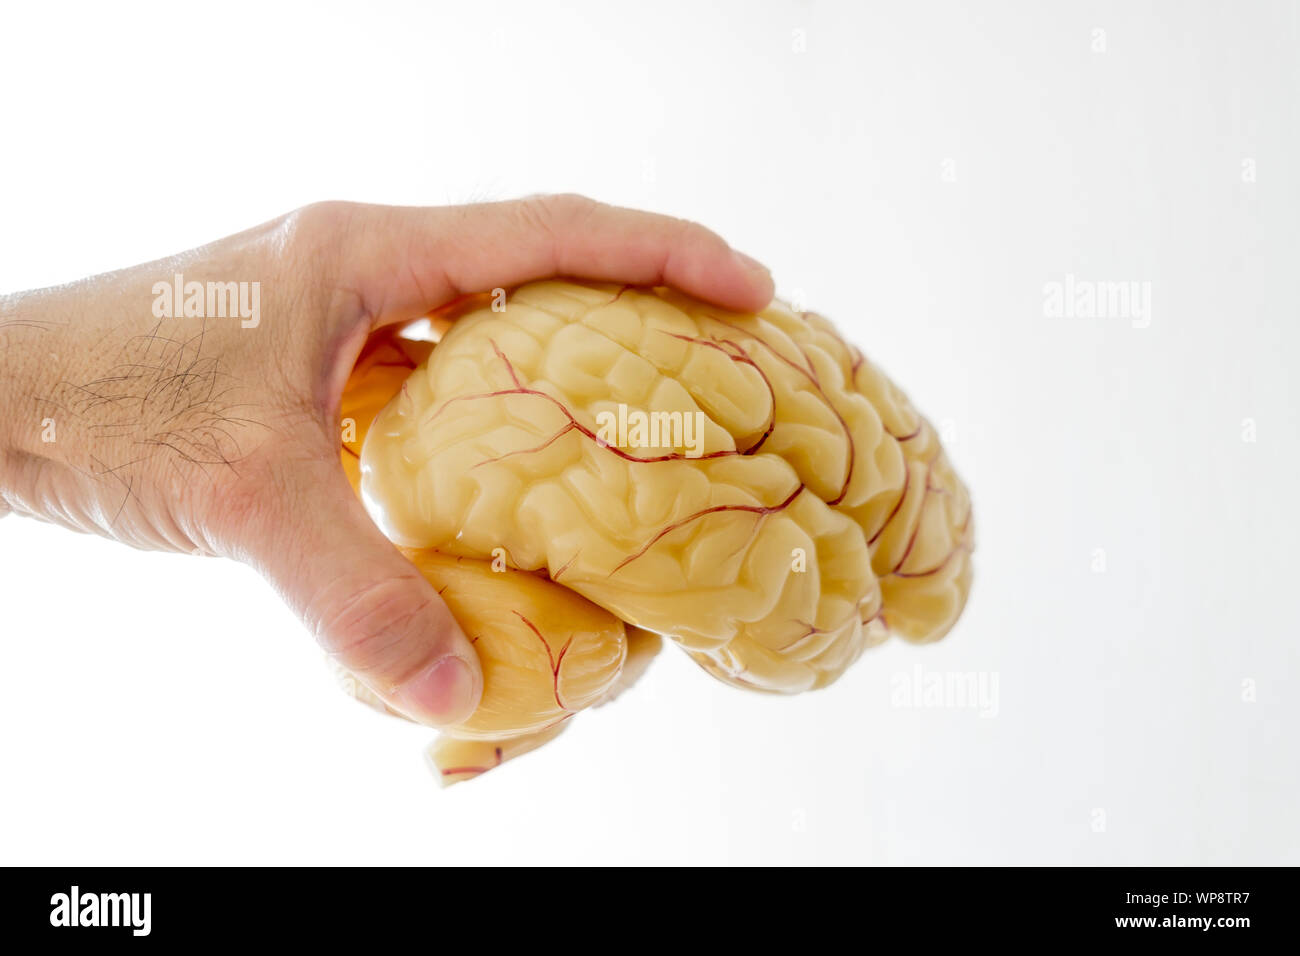 close-up-of-hand-picking-up-a-human-brain-anatomical-model-WP8TR7.jpg